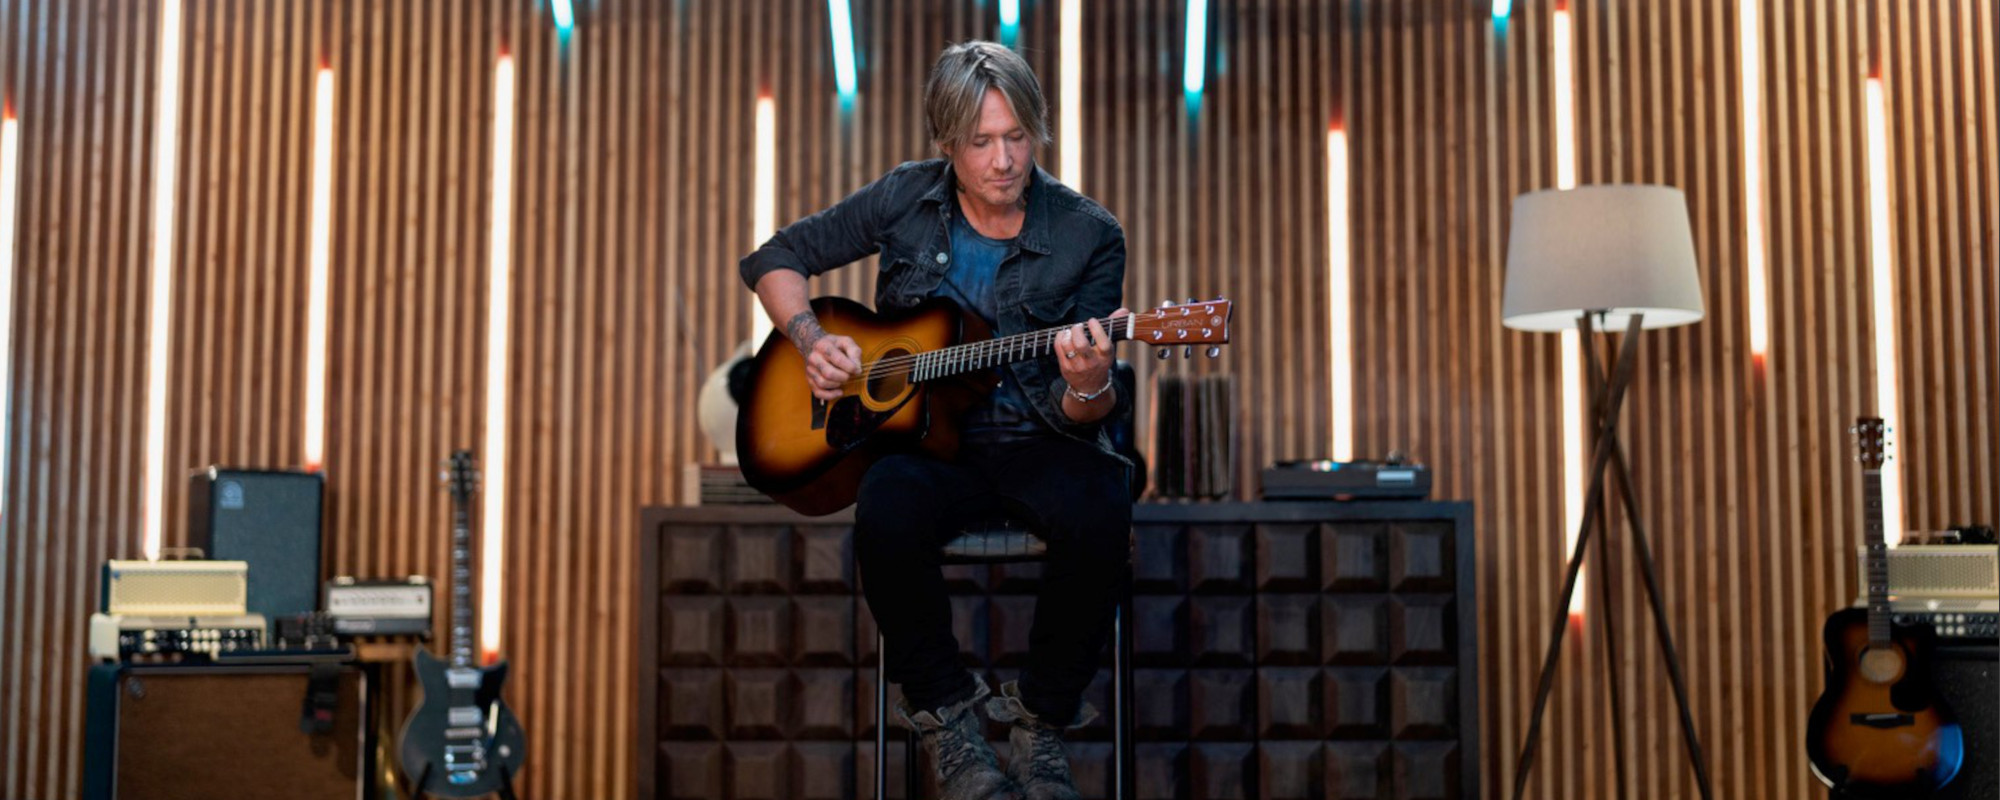 Gear Review: Yamaha Music Partners with Keith Urban